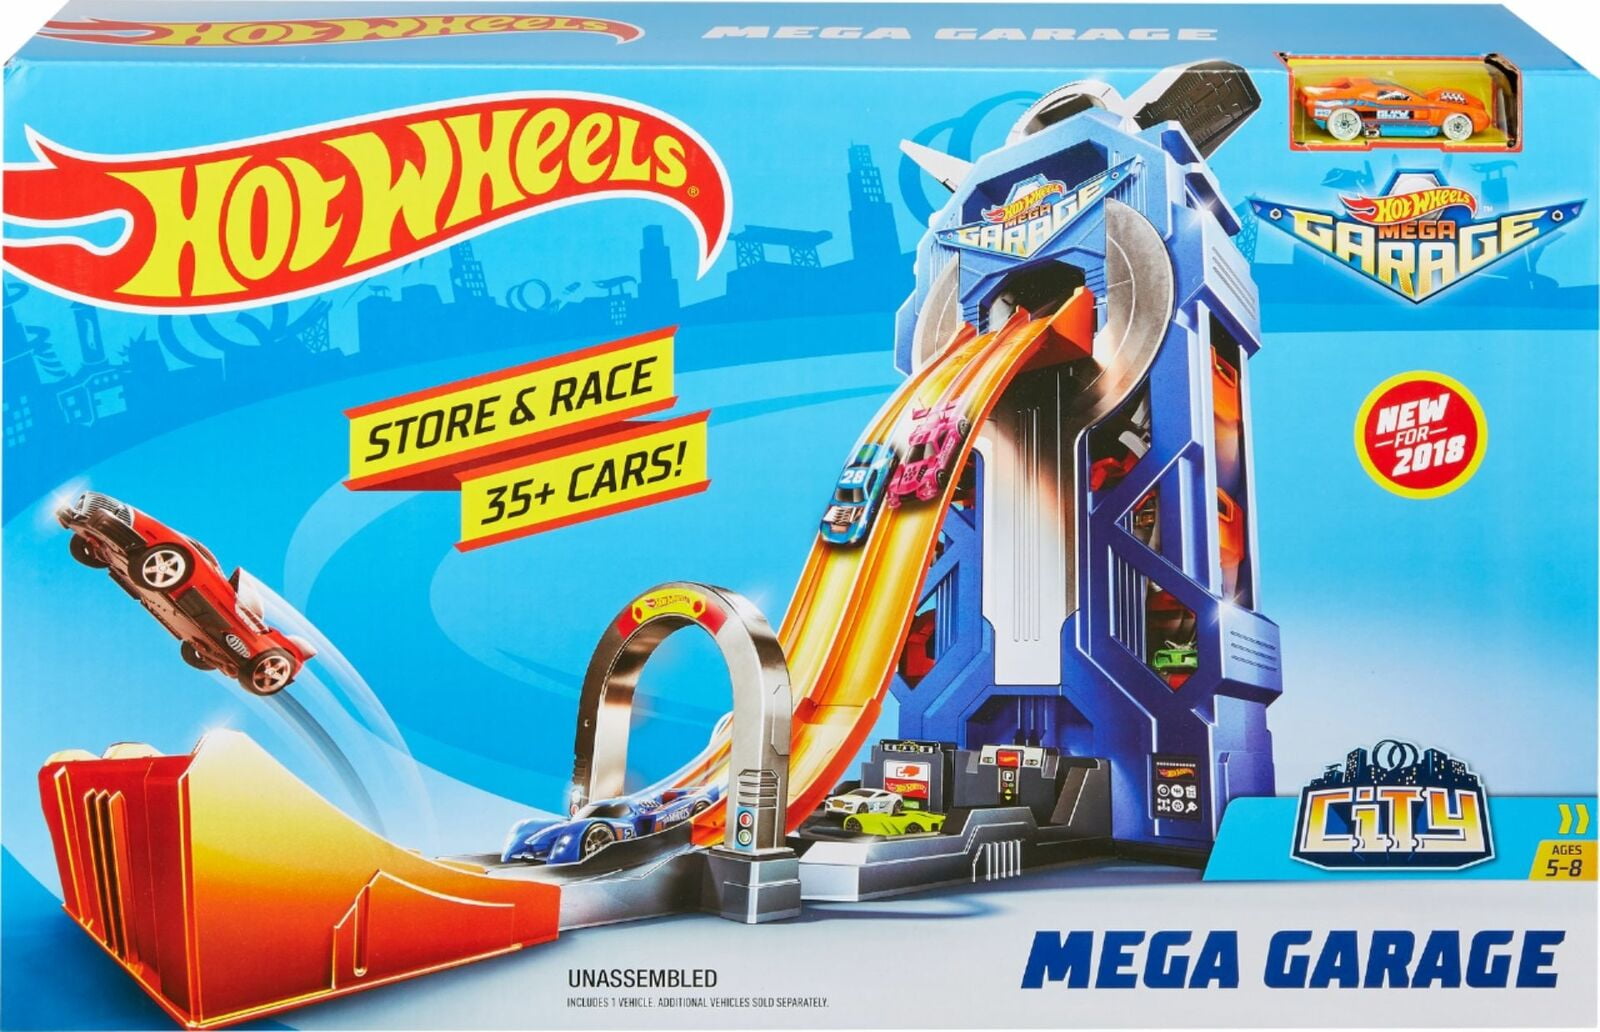 Details about   Hot Wheels City Mega Garage Play Set Diecast Mini Toy Car Tower Track Build Gift 